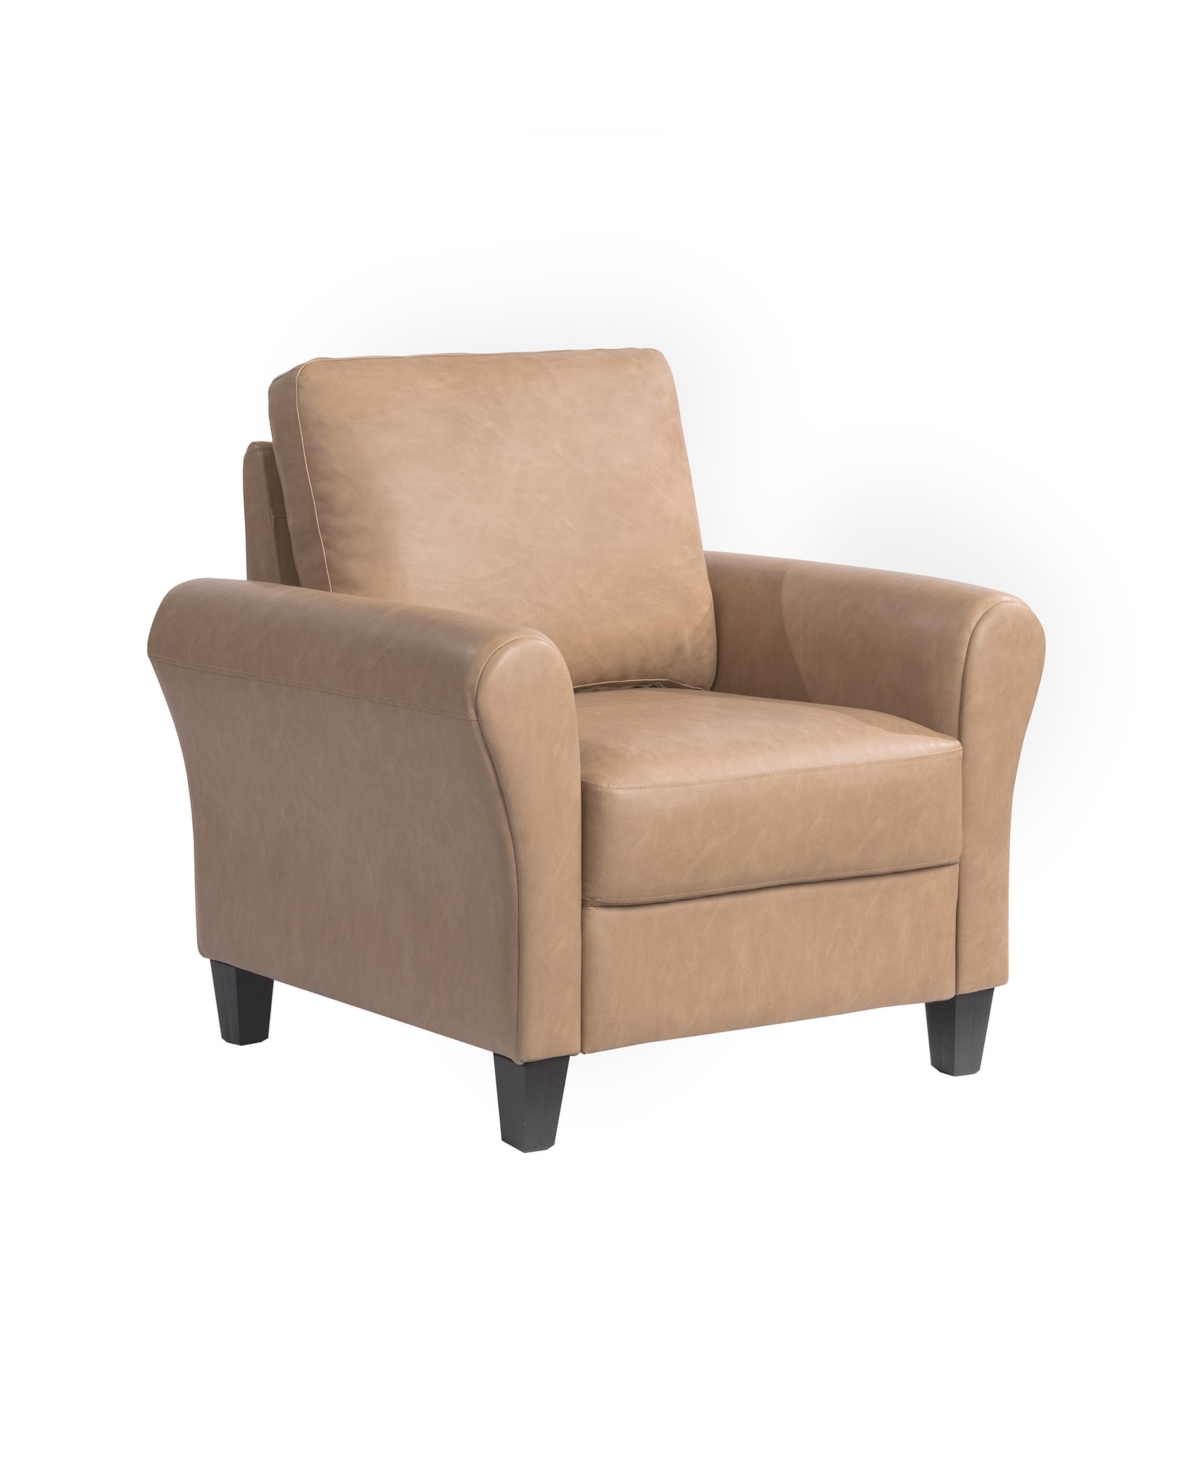 Shop Lifestyle Solutions 35.4" W Faux Leather Wilshire Chair With Rolled Arms In Light Brown